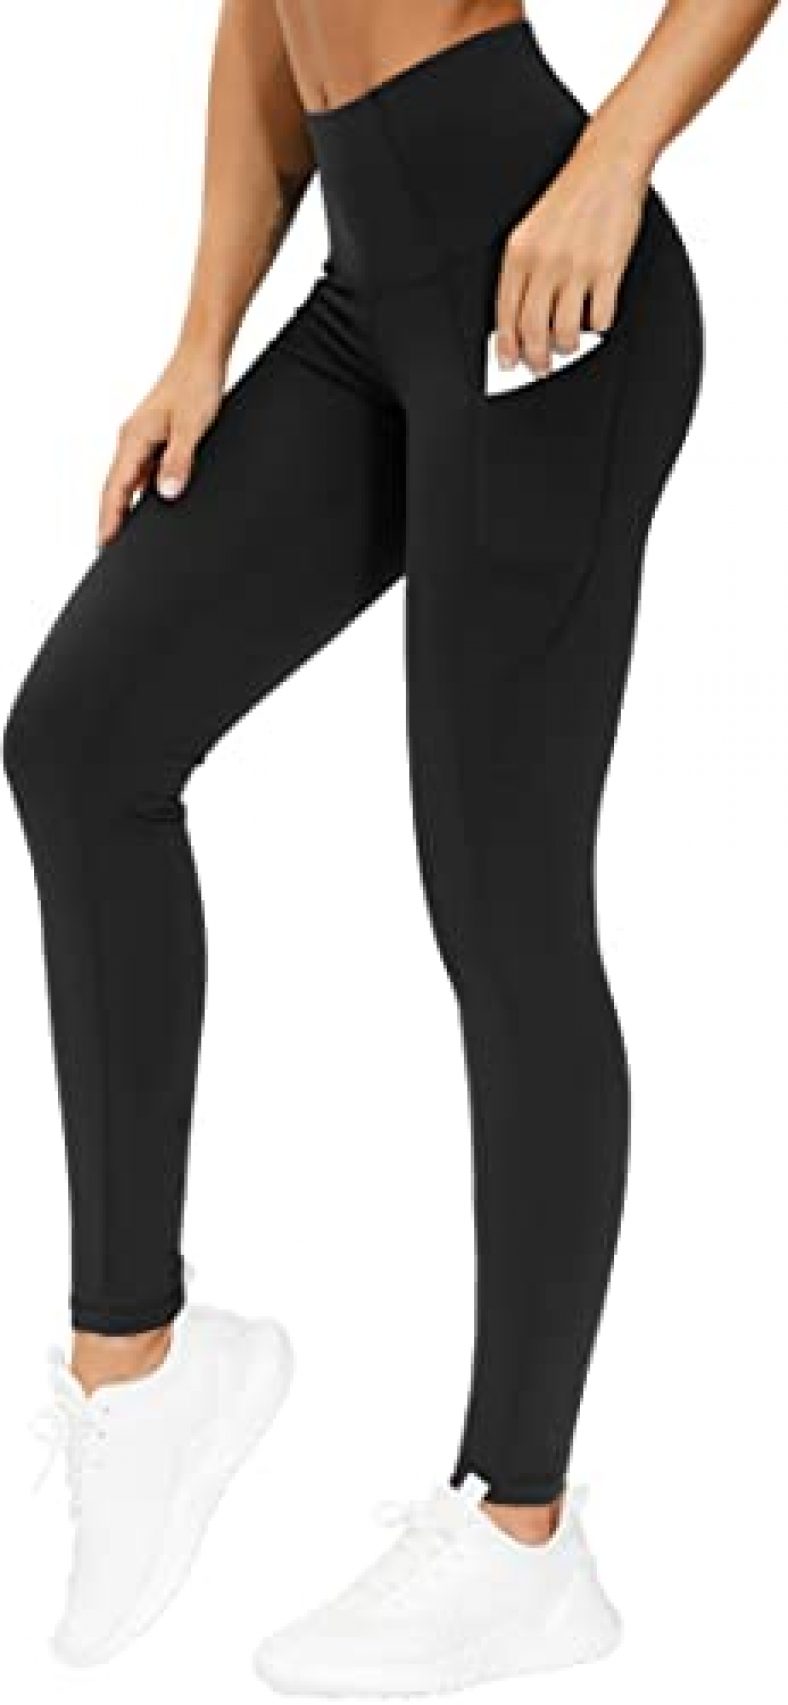 THE GYM PEOPLE Thick High Waist Leggings